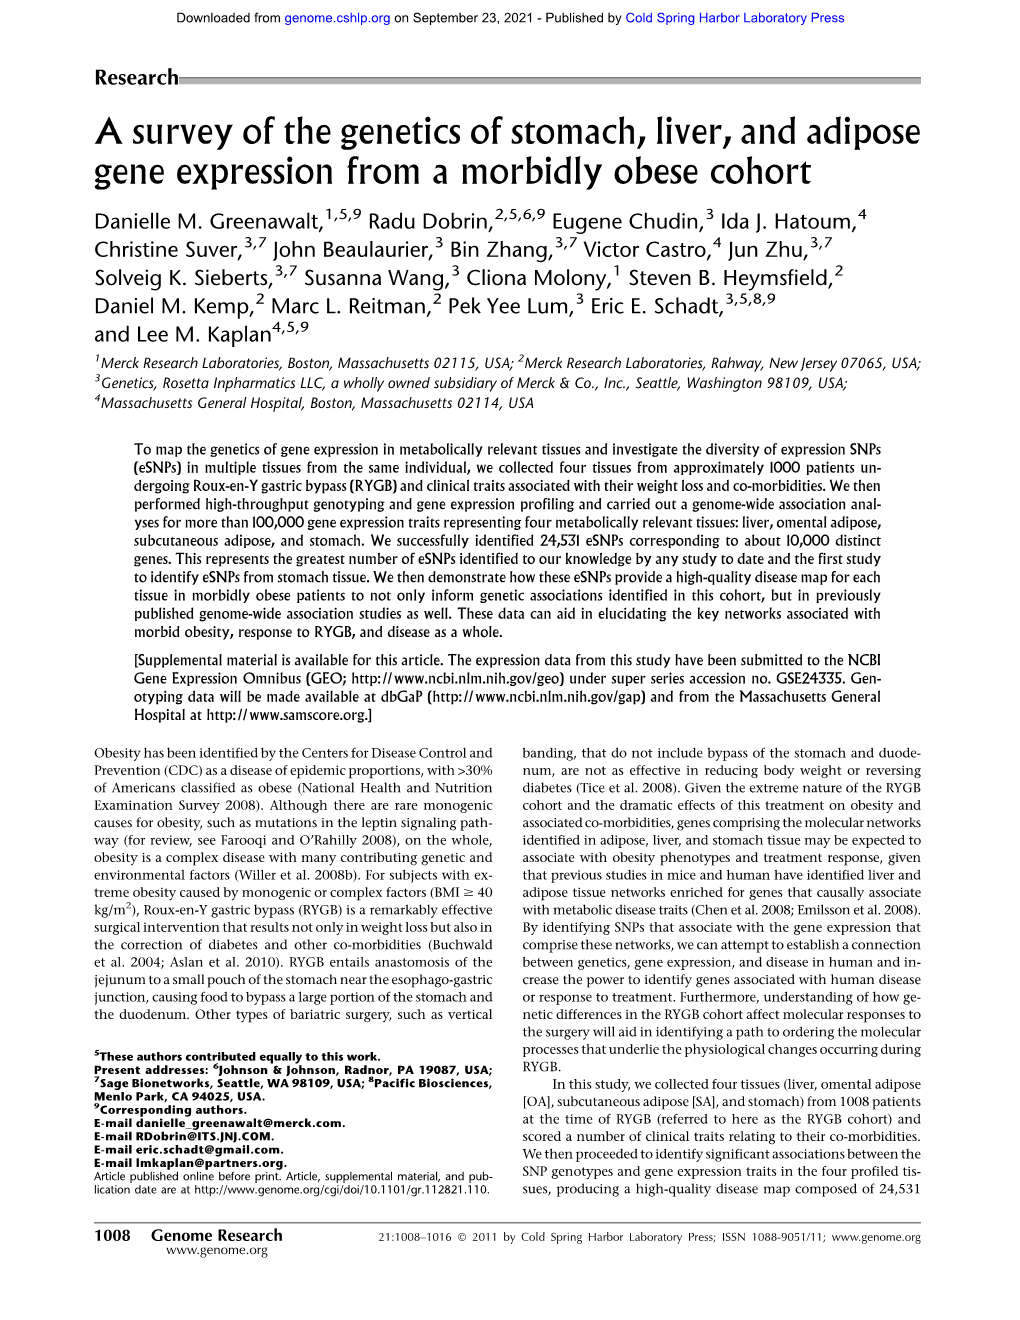 A Survey of the Genetics of Stomach, Liver, and Adipose Gene Expression from a Morbidly Obese Cohort